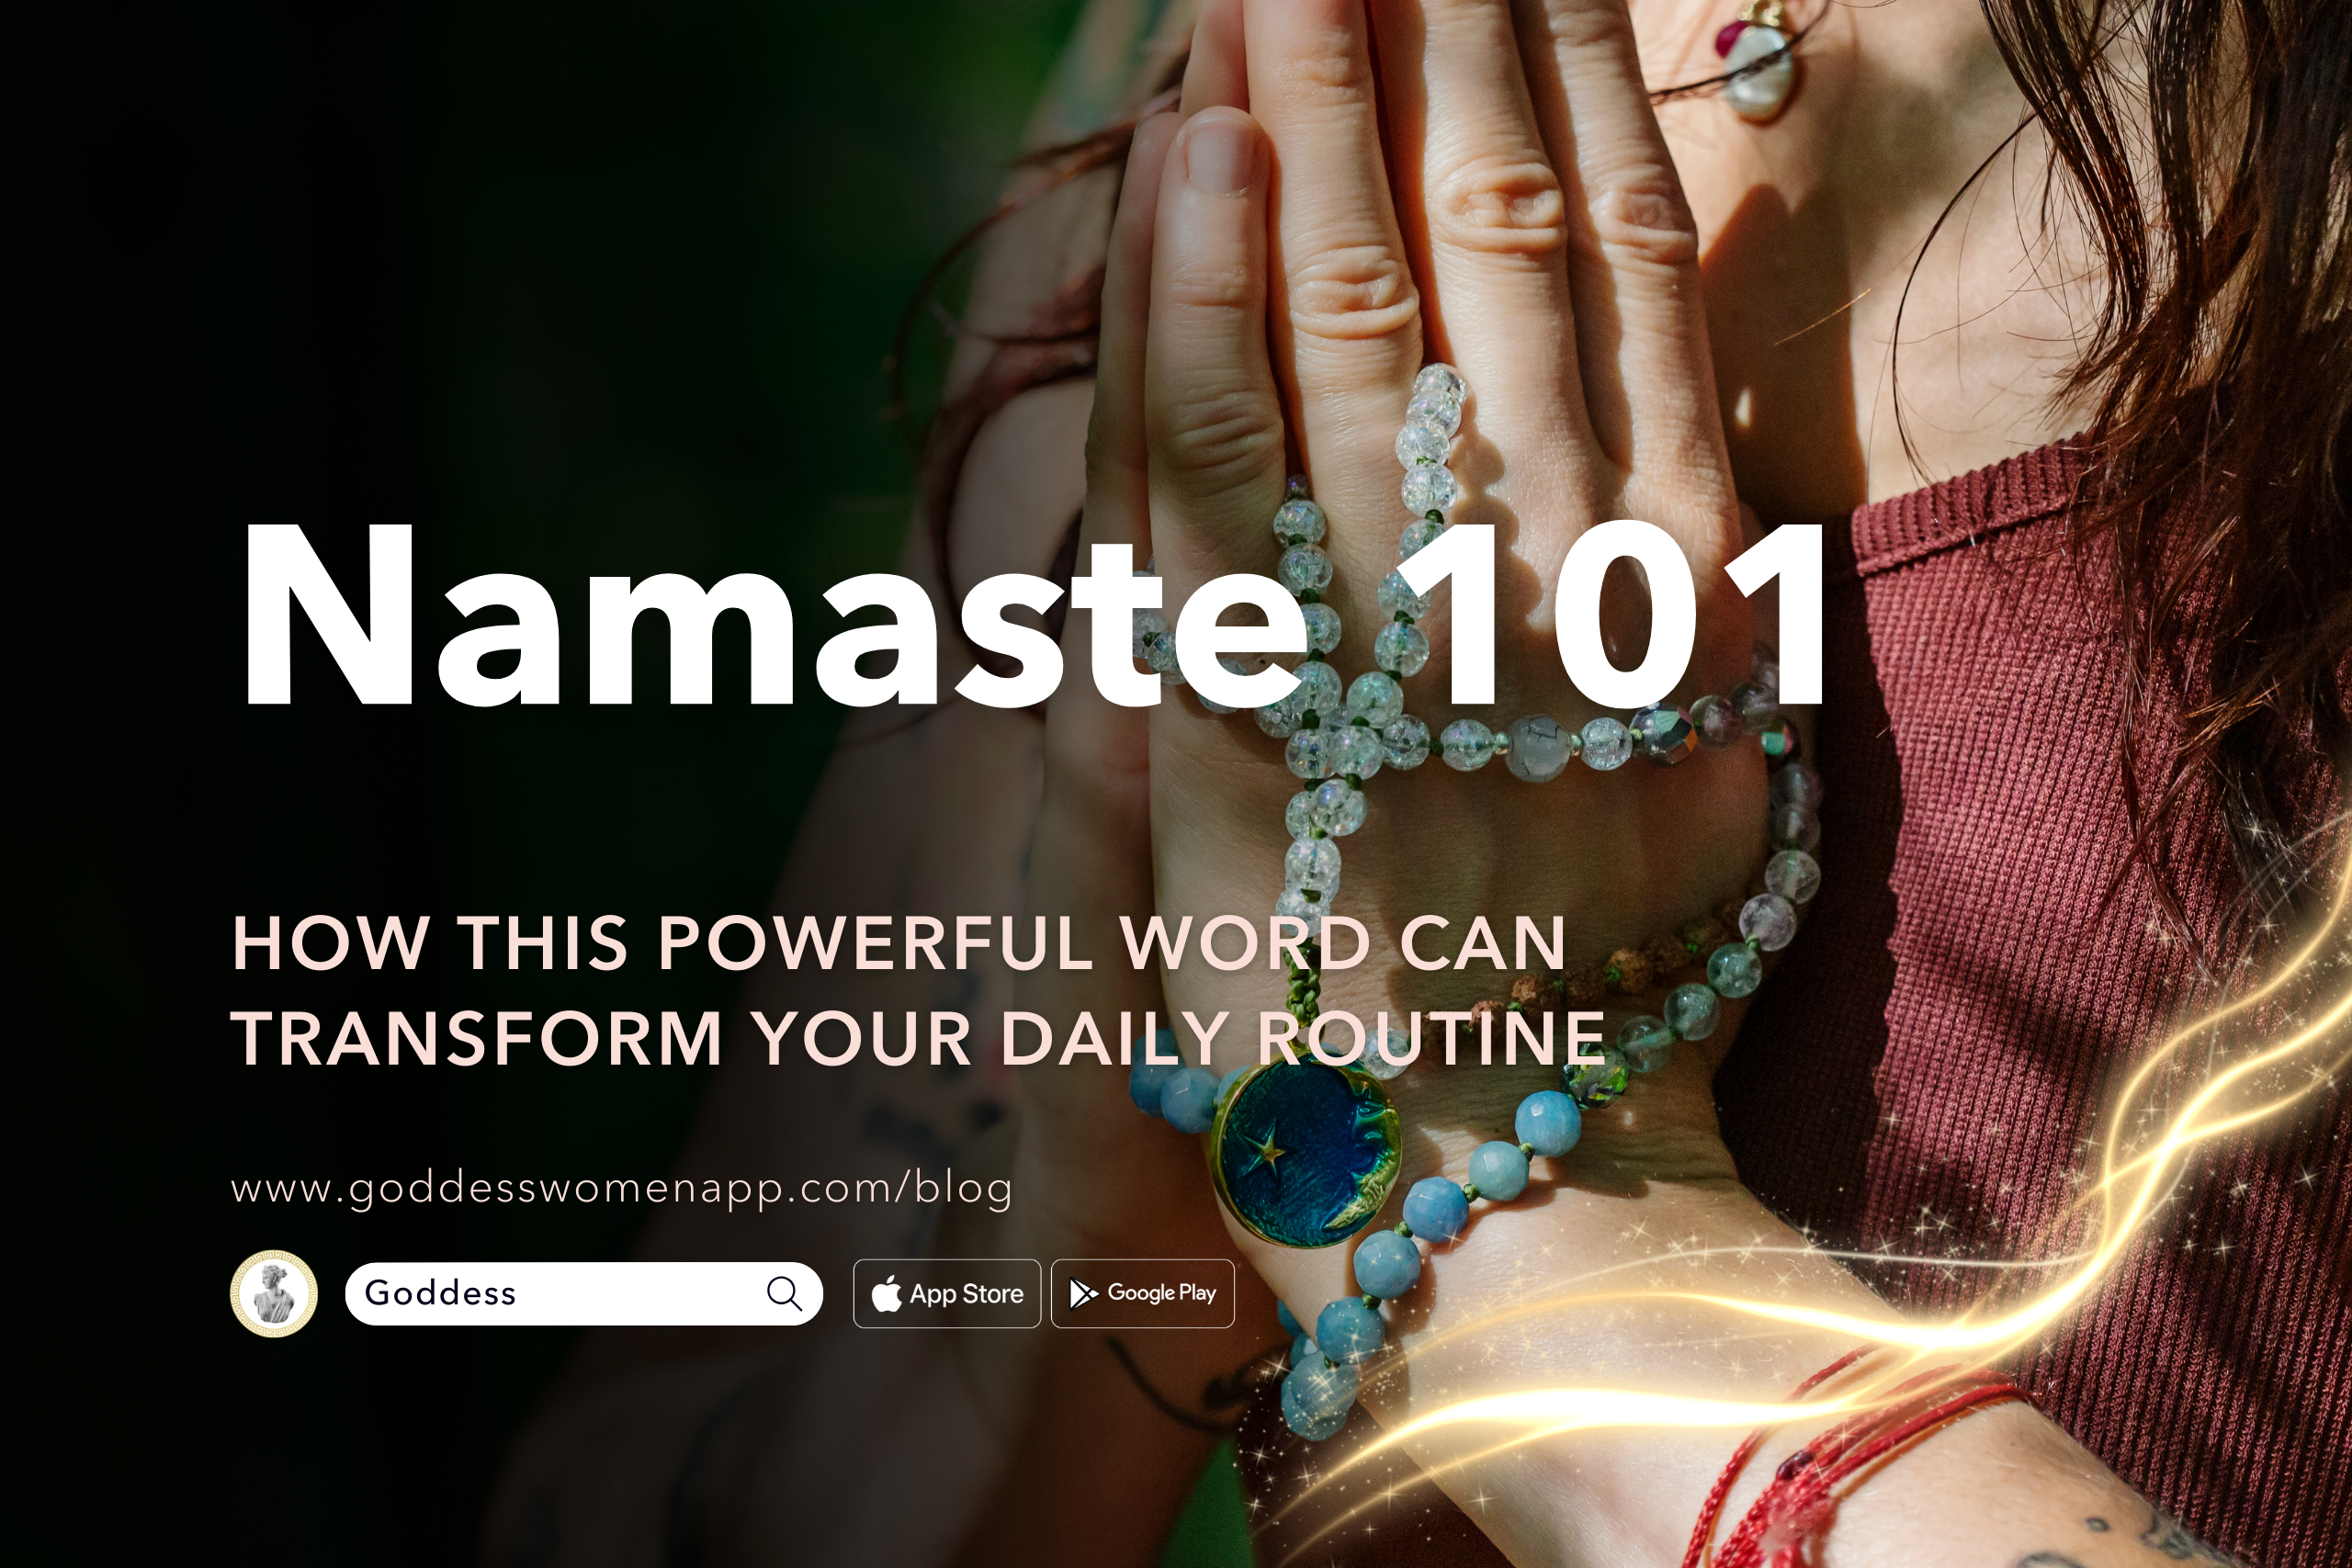 Namaste 101: How This Powerful Word Can Transform Your Daily Routine